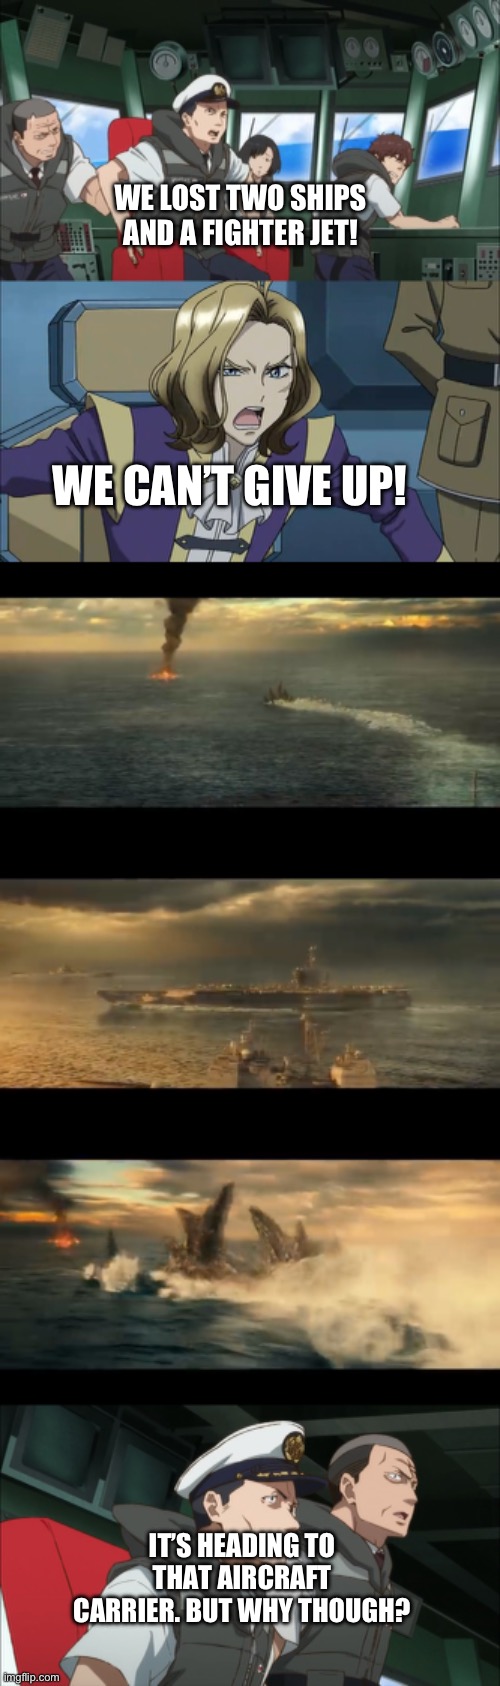 Sea battle part 4 | WE LOST TWO SHIPS AND A FIGHTER JET! WE CAN’T GIVE UP! IT’S HEADING TO THAT AIRCRAFT CARRIER. BUT WHY THOUGH? | image tagged in anime | made w/ Imgflip meme maker